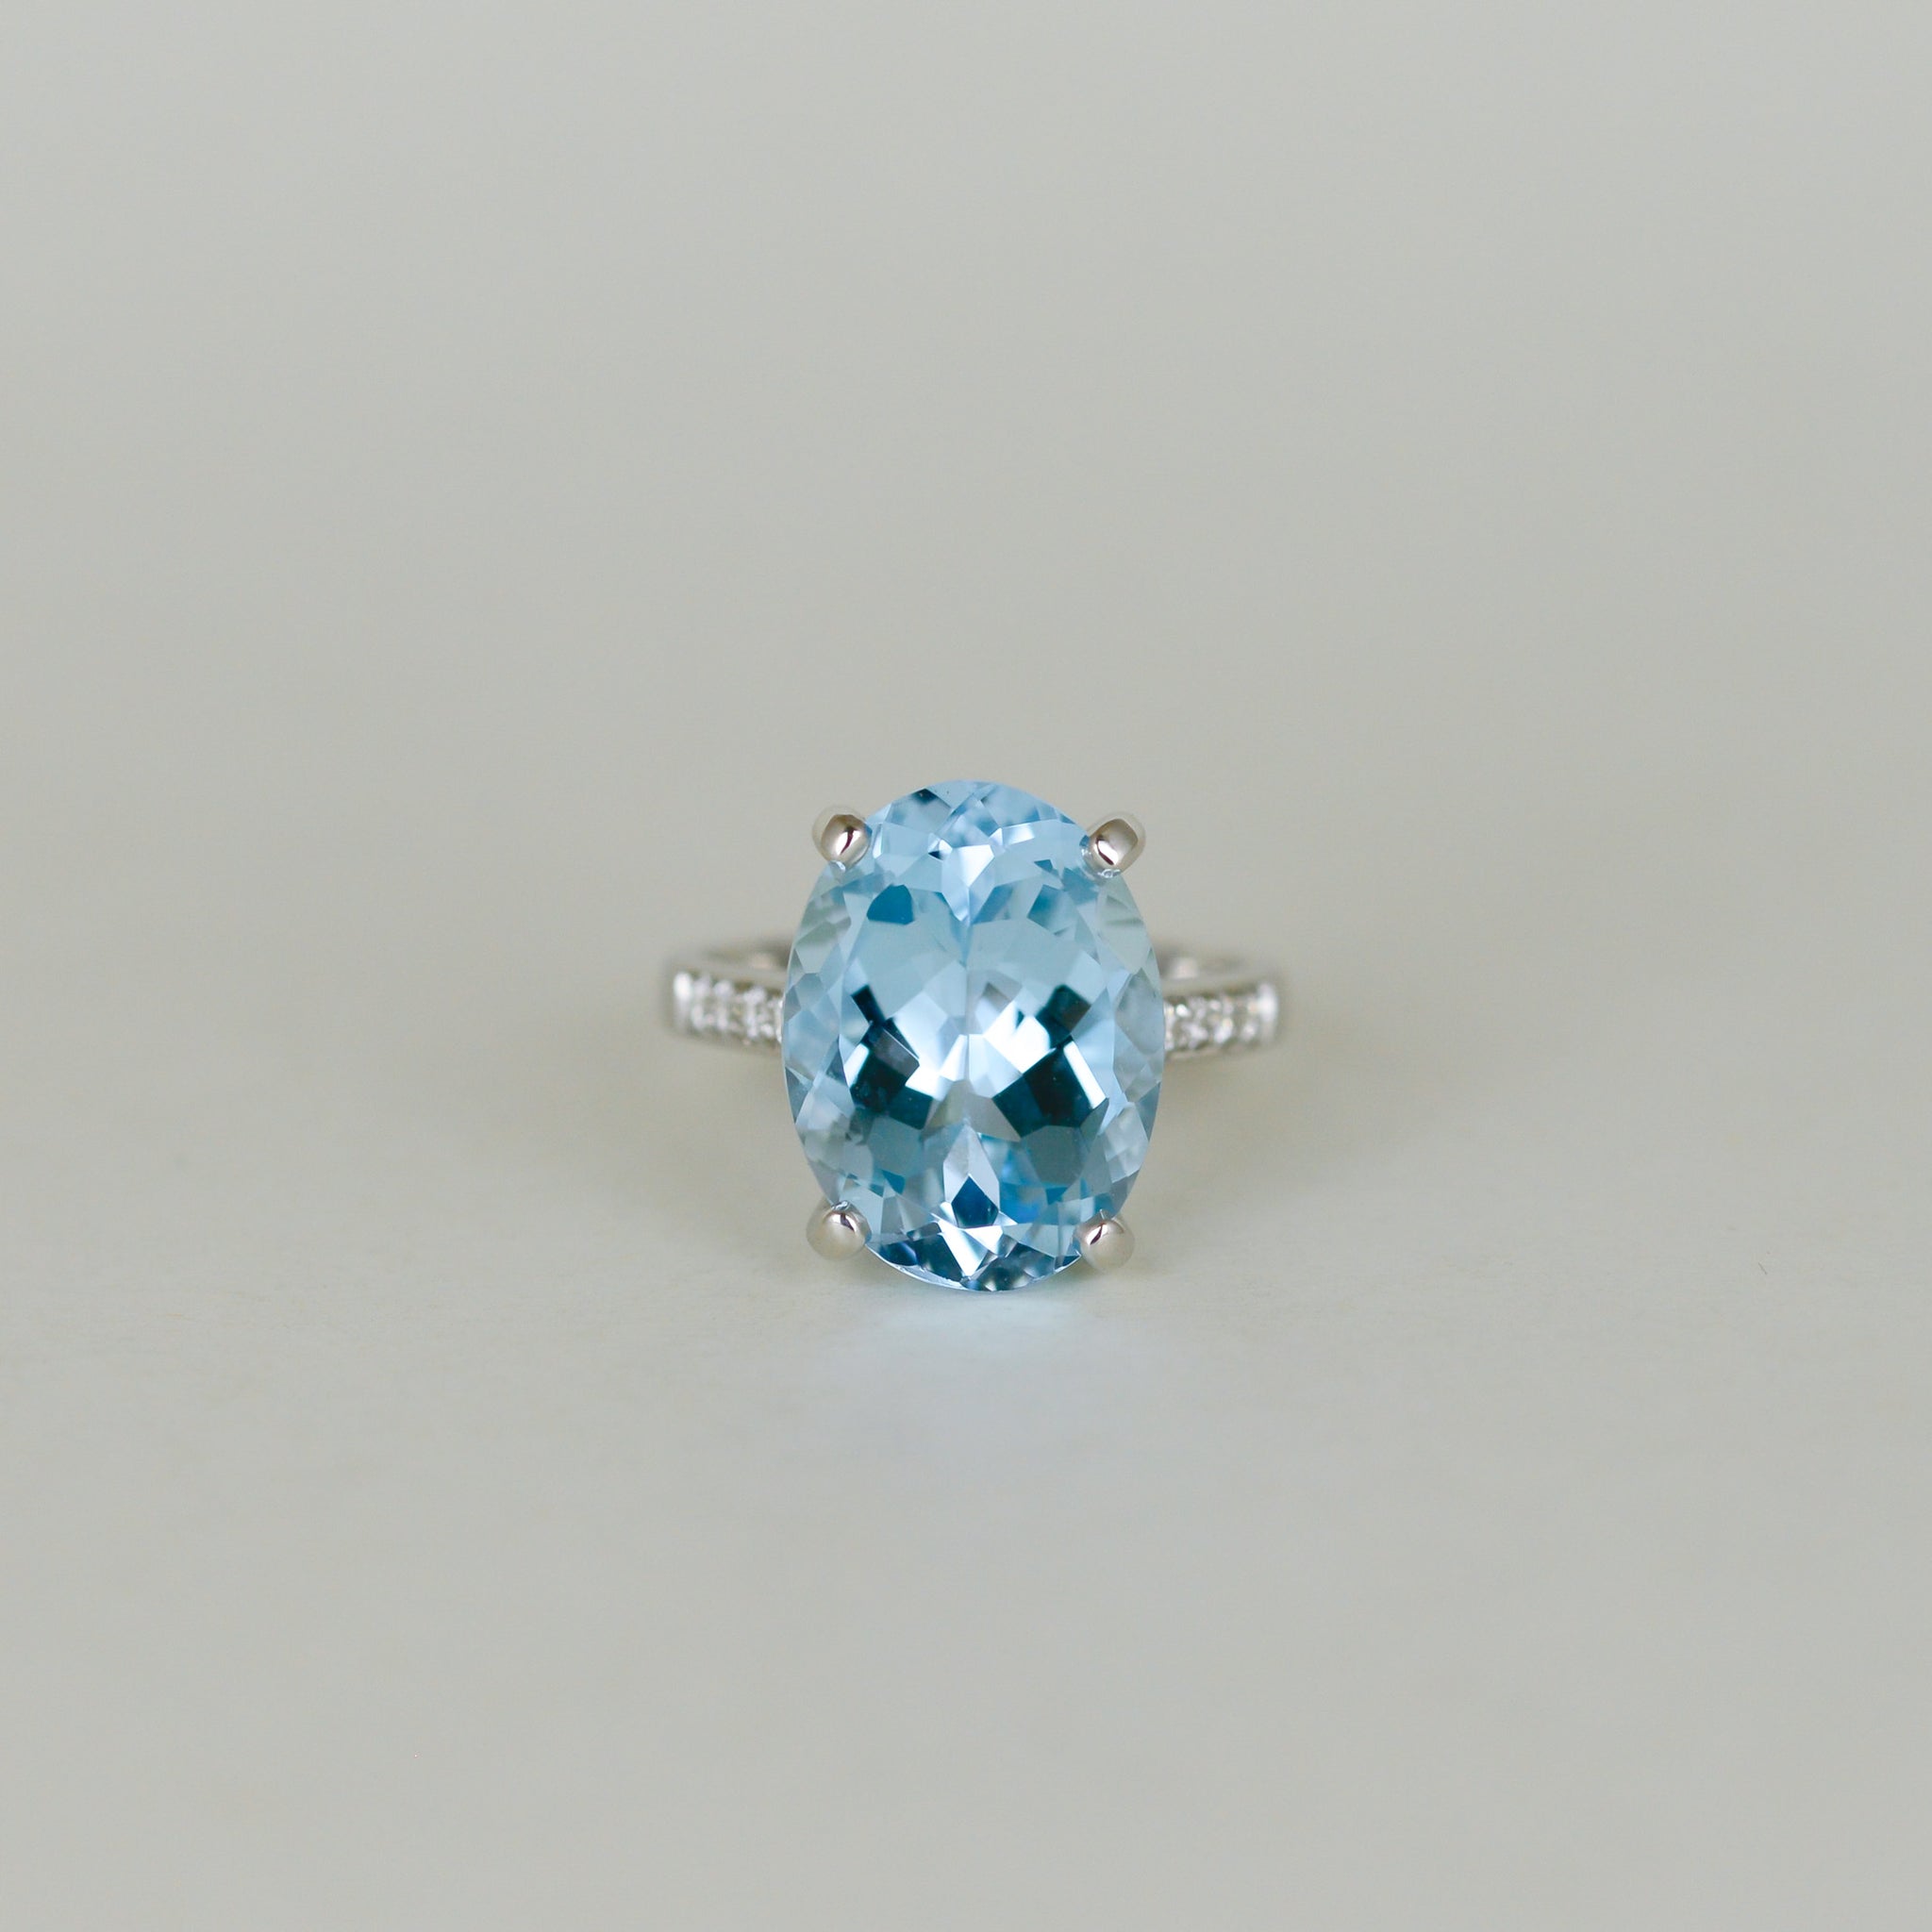 9ct White Gold 11.00ct Oval Blue Topaz and Diamond Dress Ring